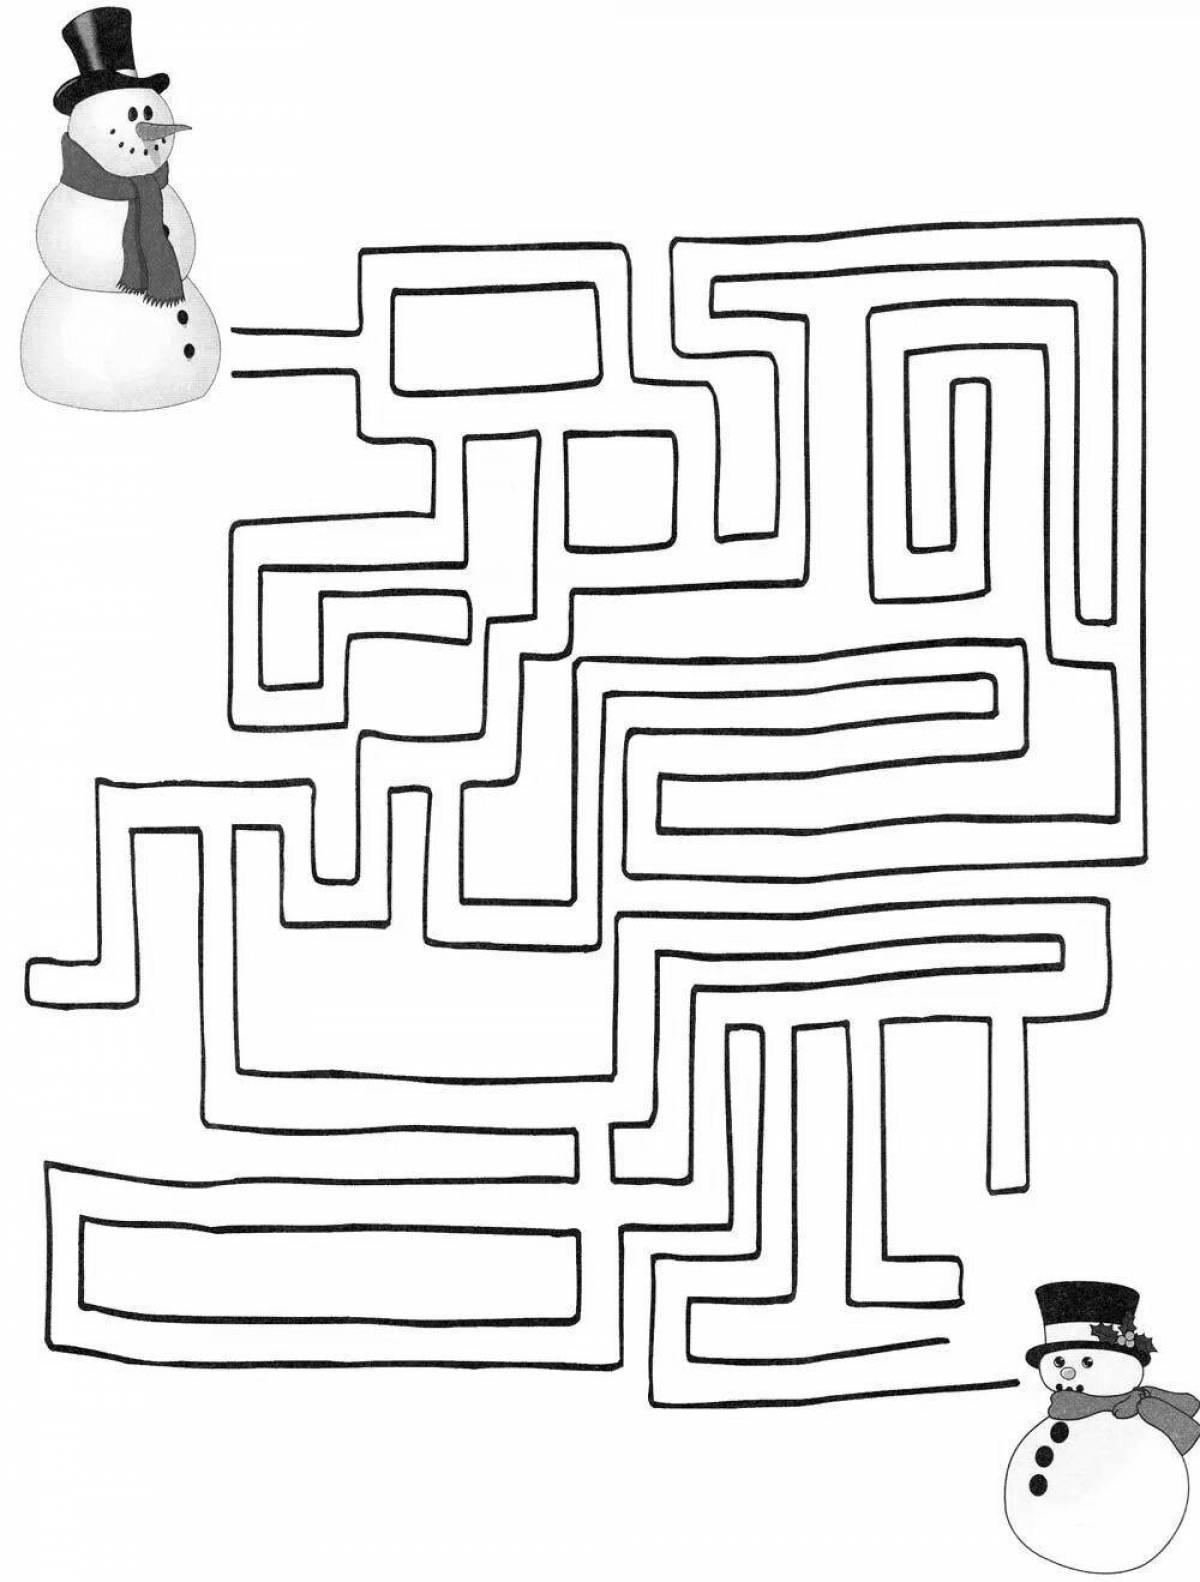 Exciting New Year's maze